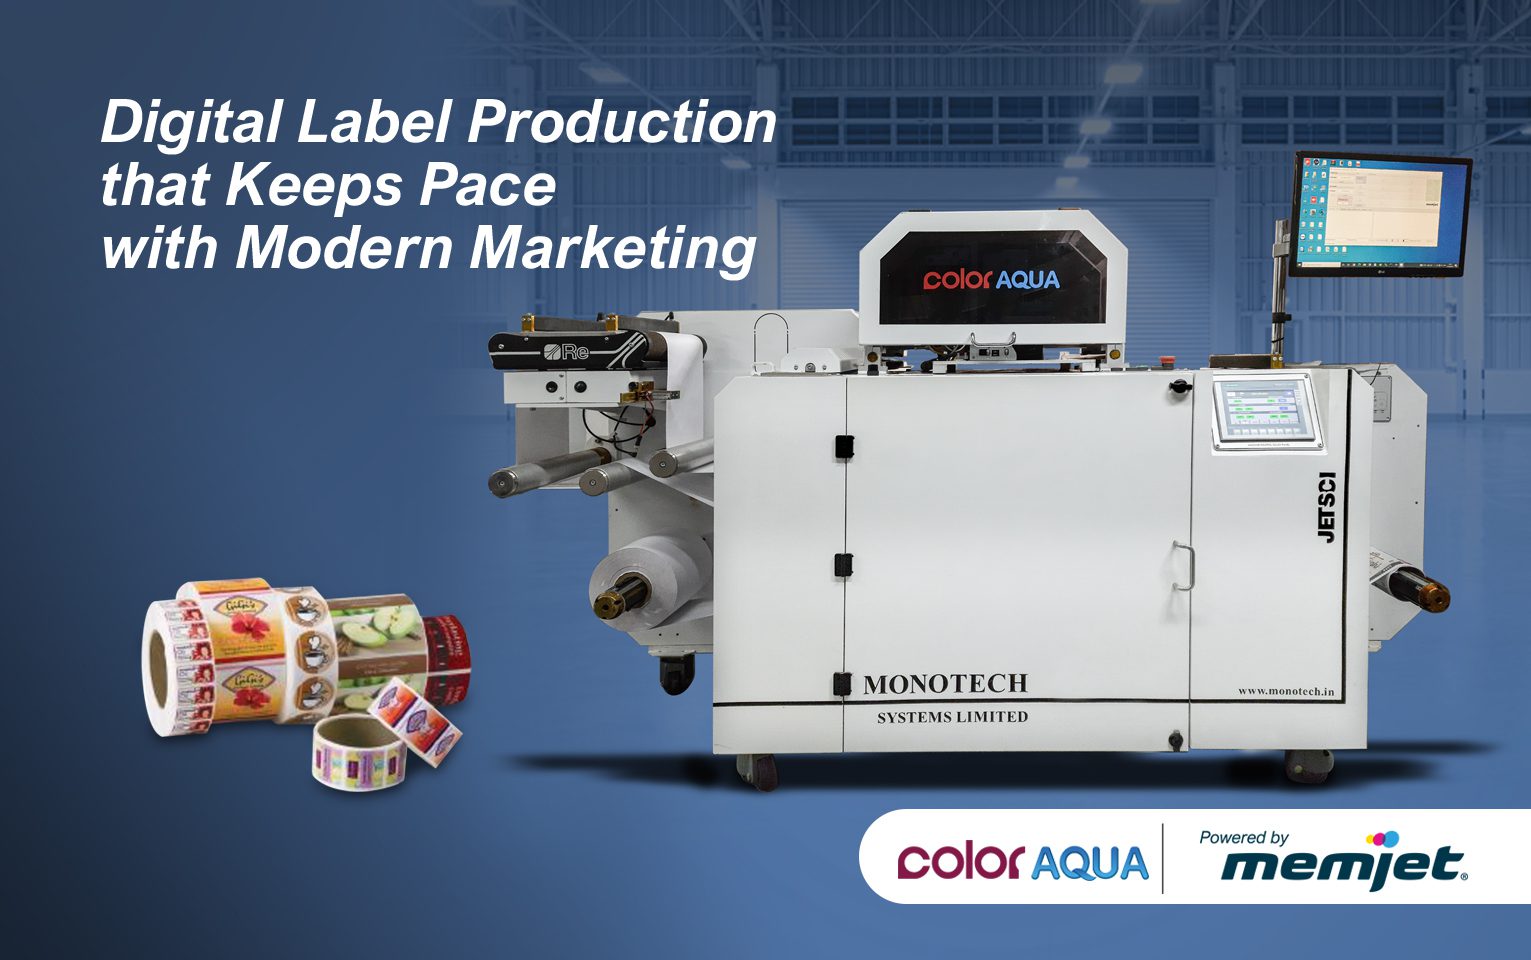 Digital Label Production that Keeps Pace with Modern Marketing